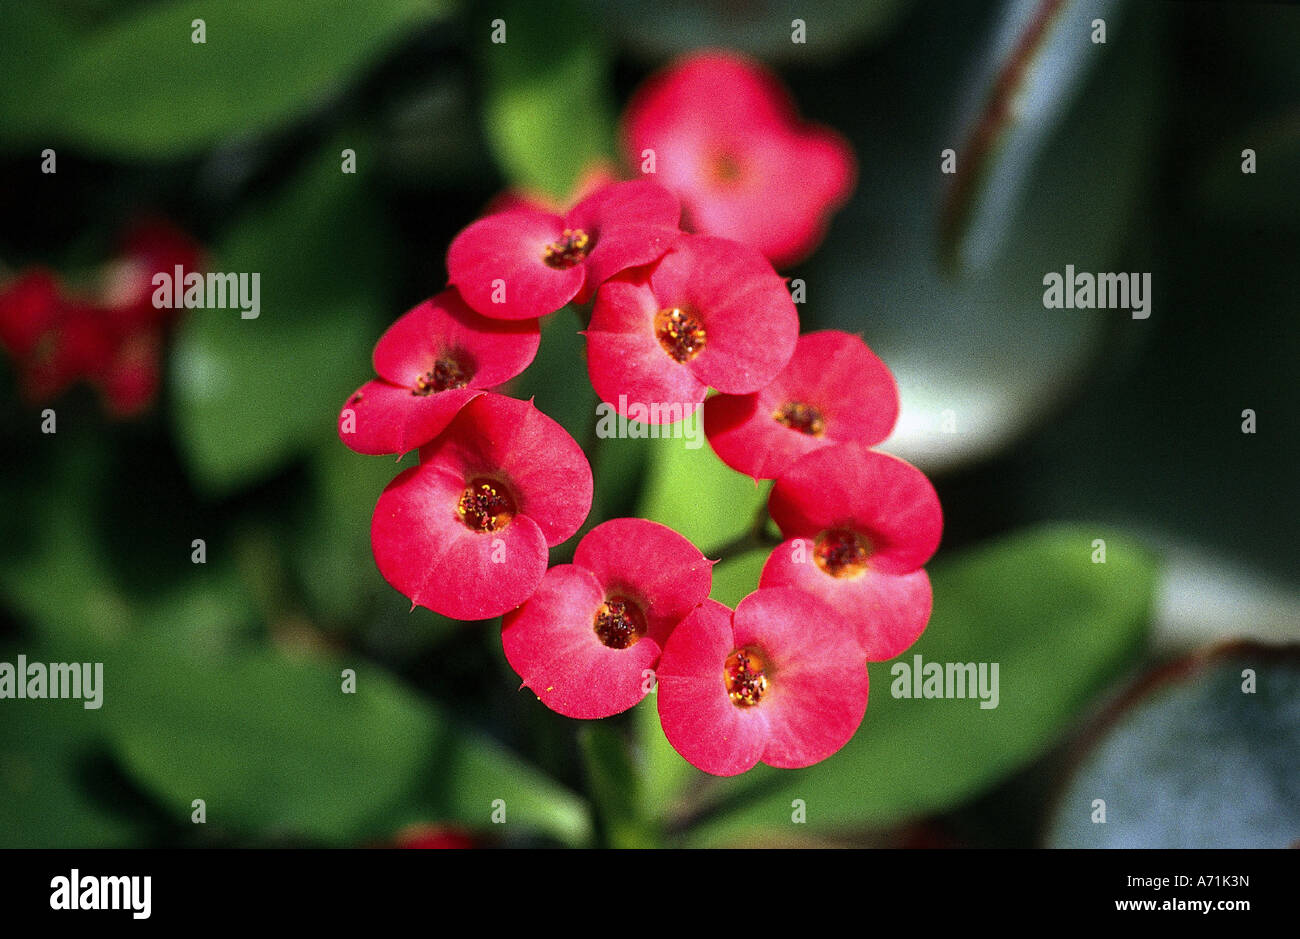 botany, Spurge, (Euphorbia), Christmas thorn, (Euphorbia milii), blossoms, ornamental plants, red, blooming, flowering, corolla, Stock Photo